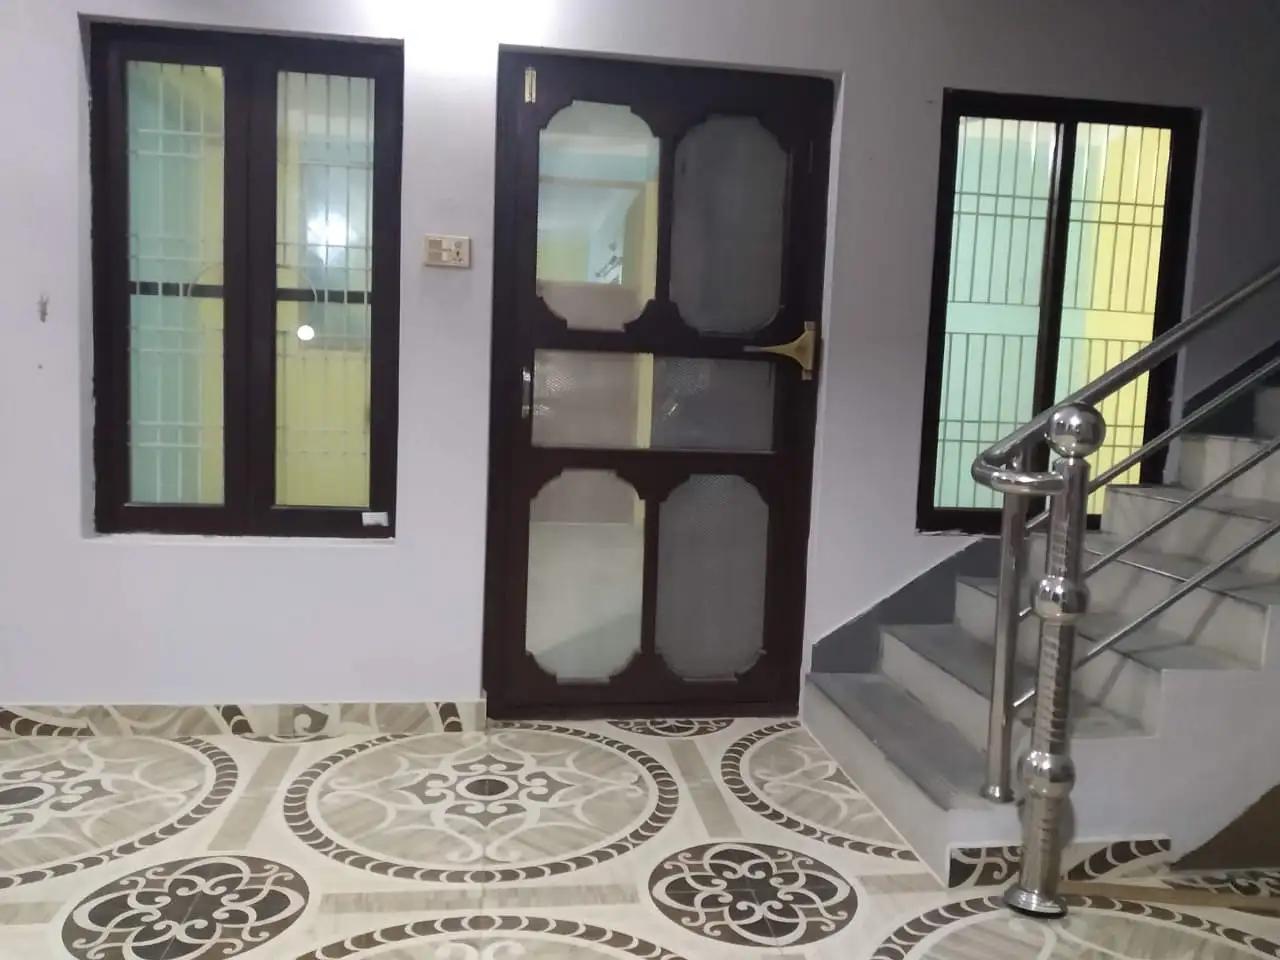 Flat (House) for Rent in Bharatpur, Chitwan-image-1